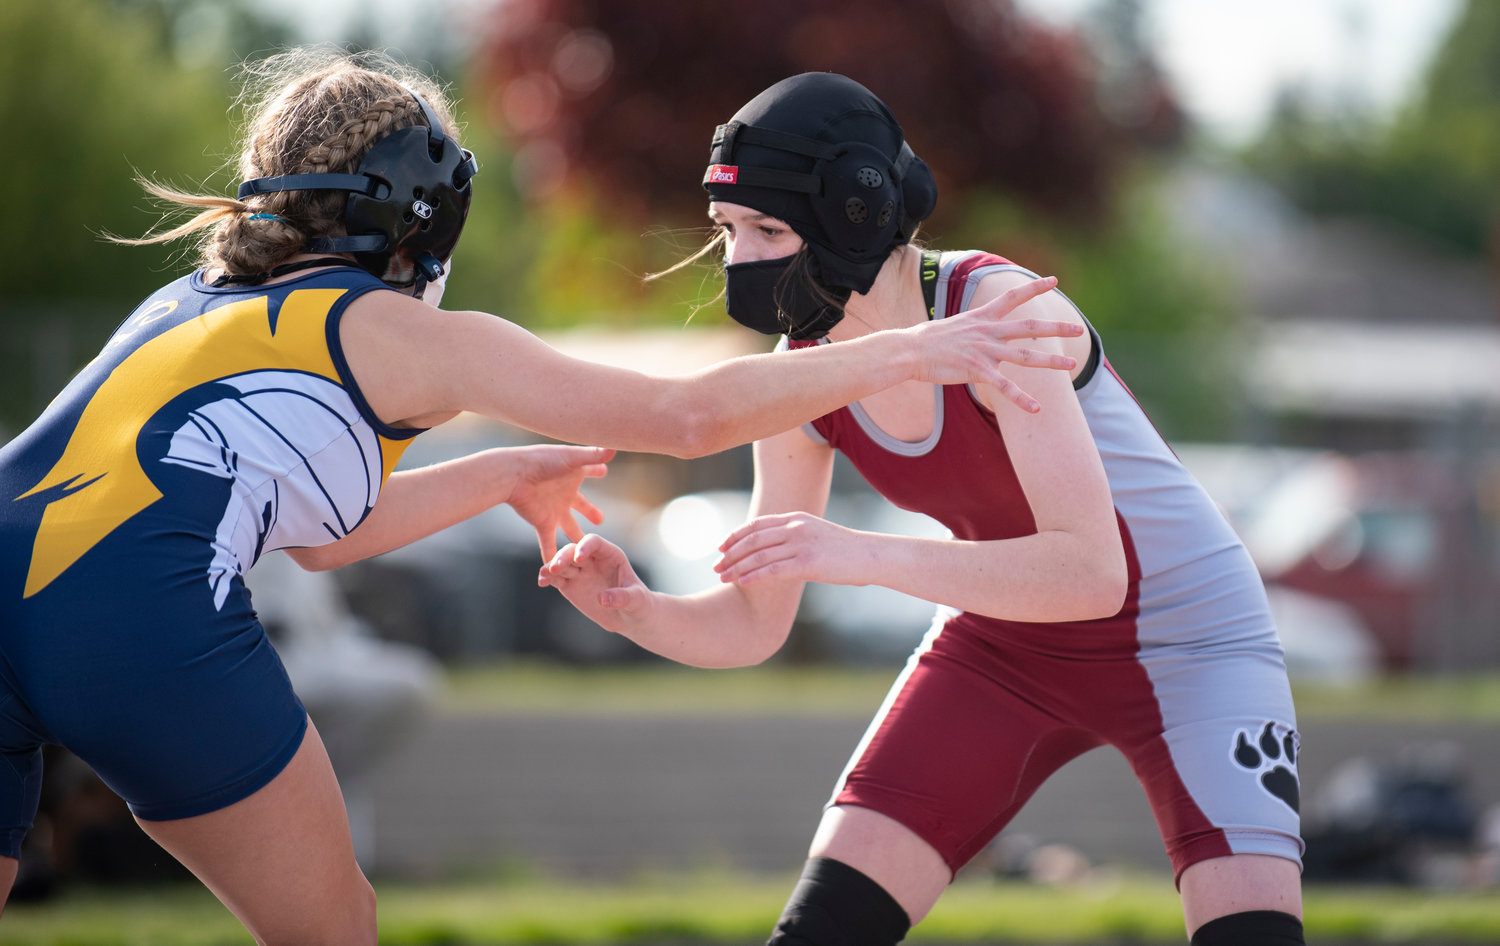 W.F. West's Bailee Kambich, right, prepares to tie up with a Forks wrestler on Thursday in Napavine.